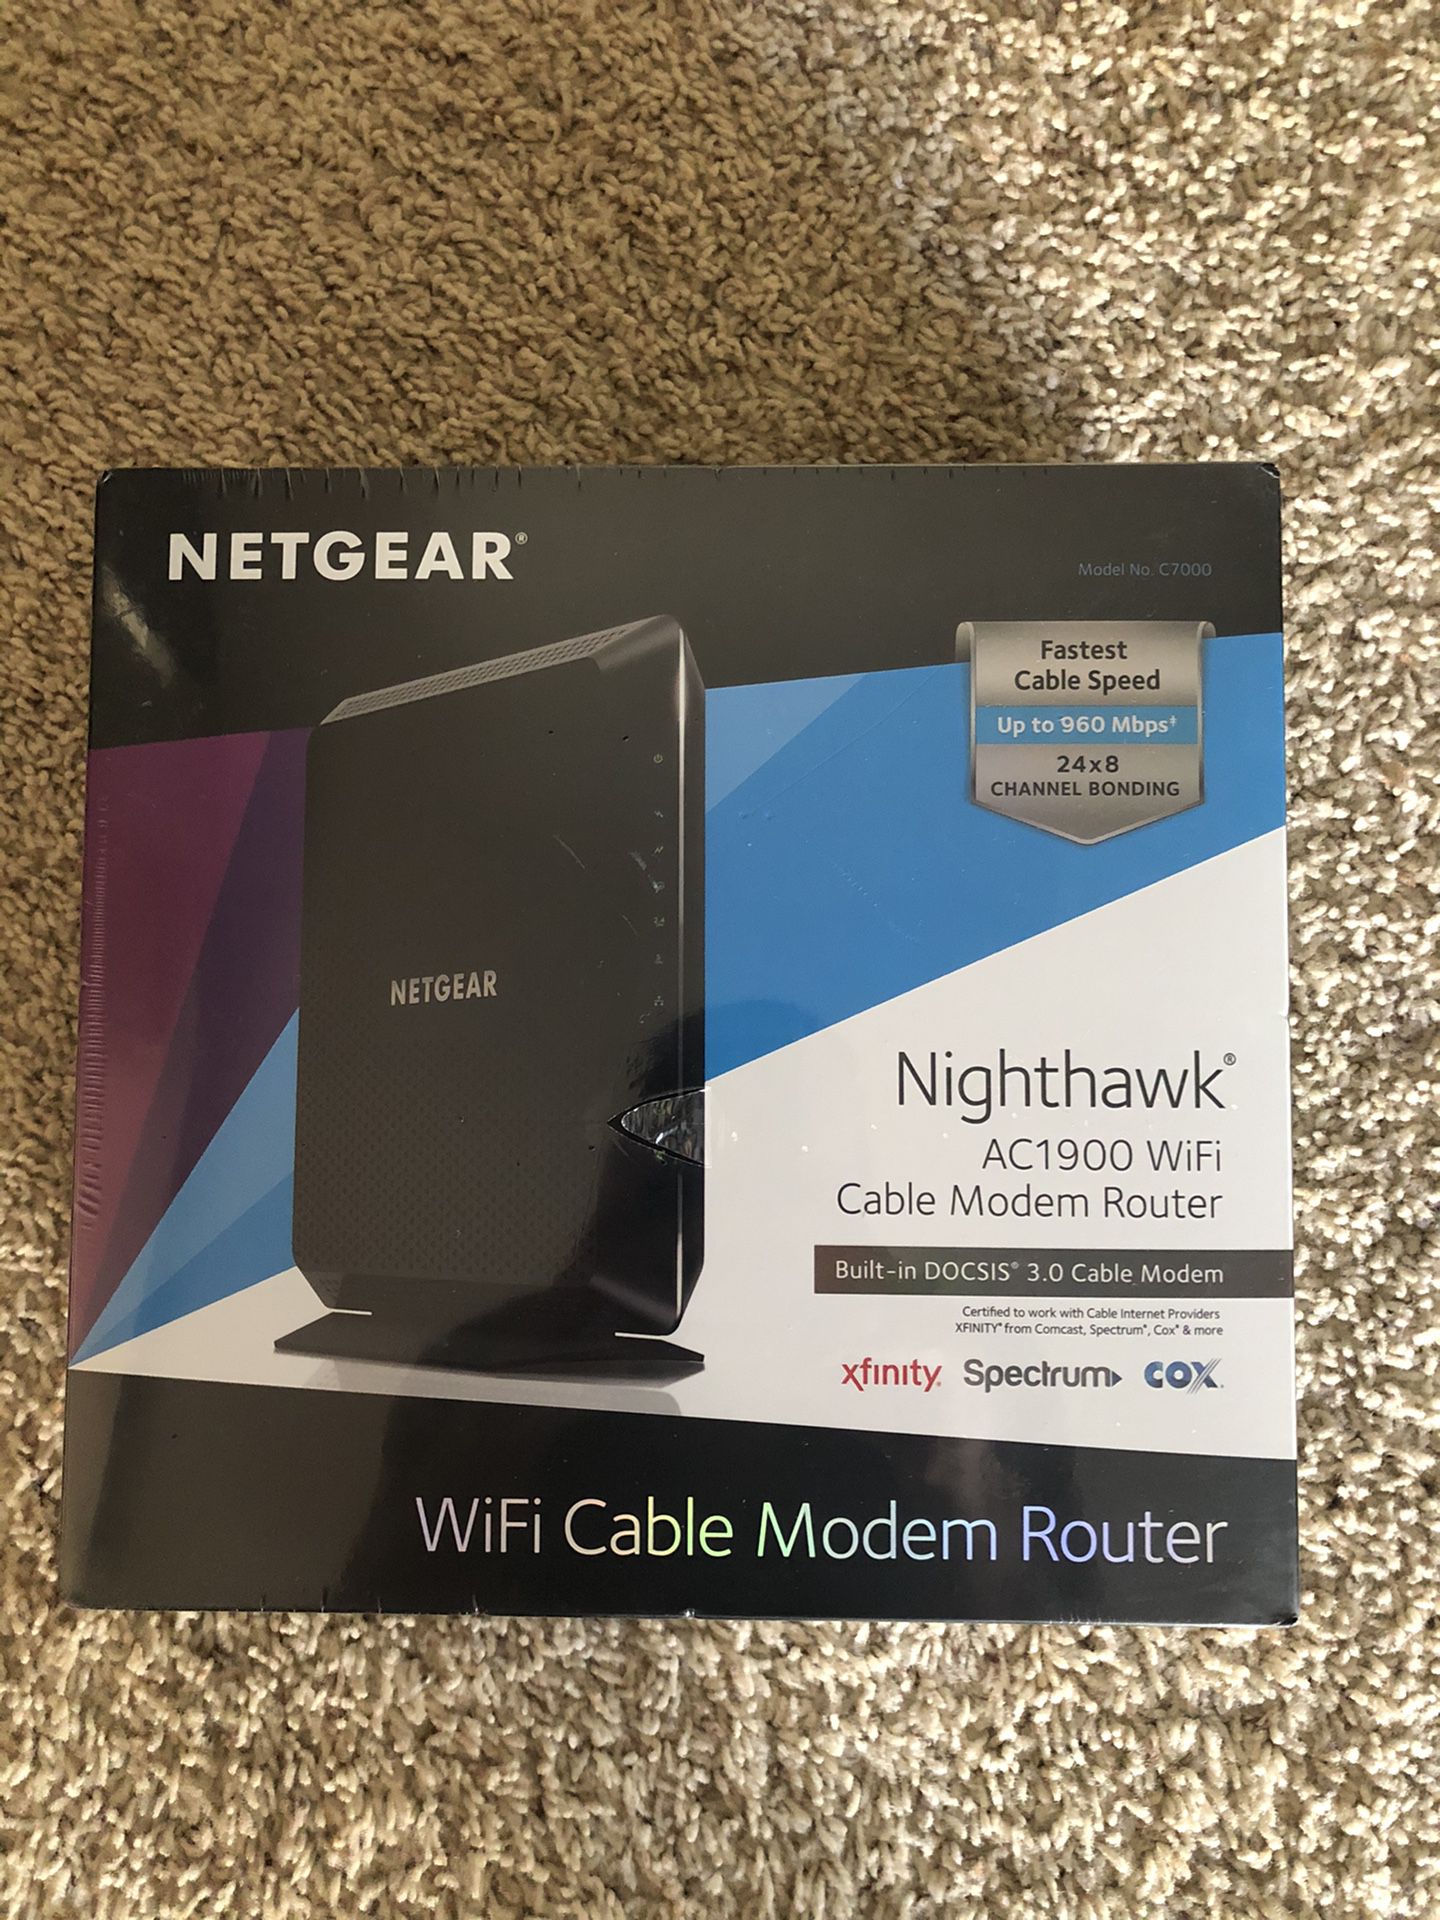 Brand new Netgear cable modem router